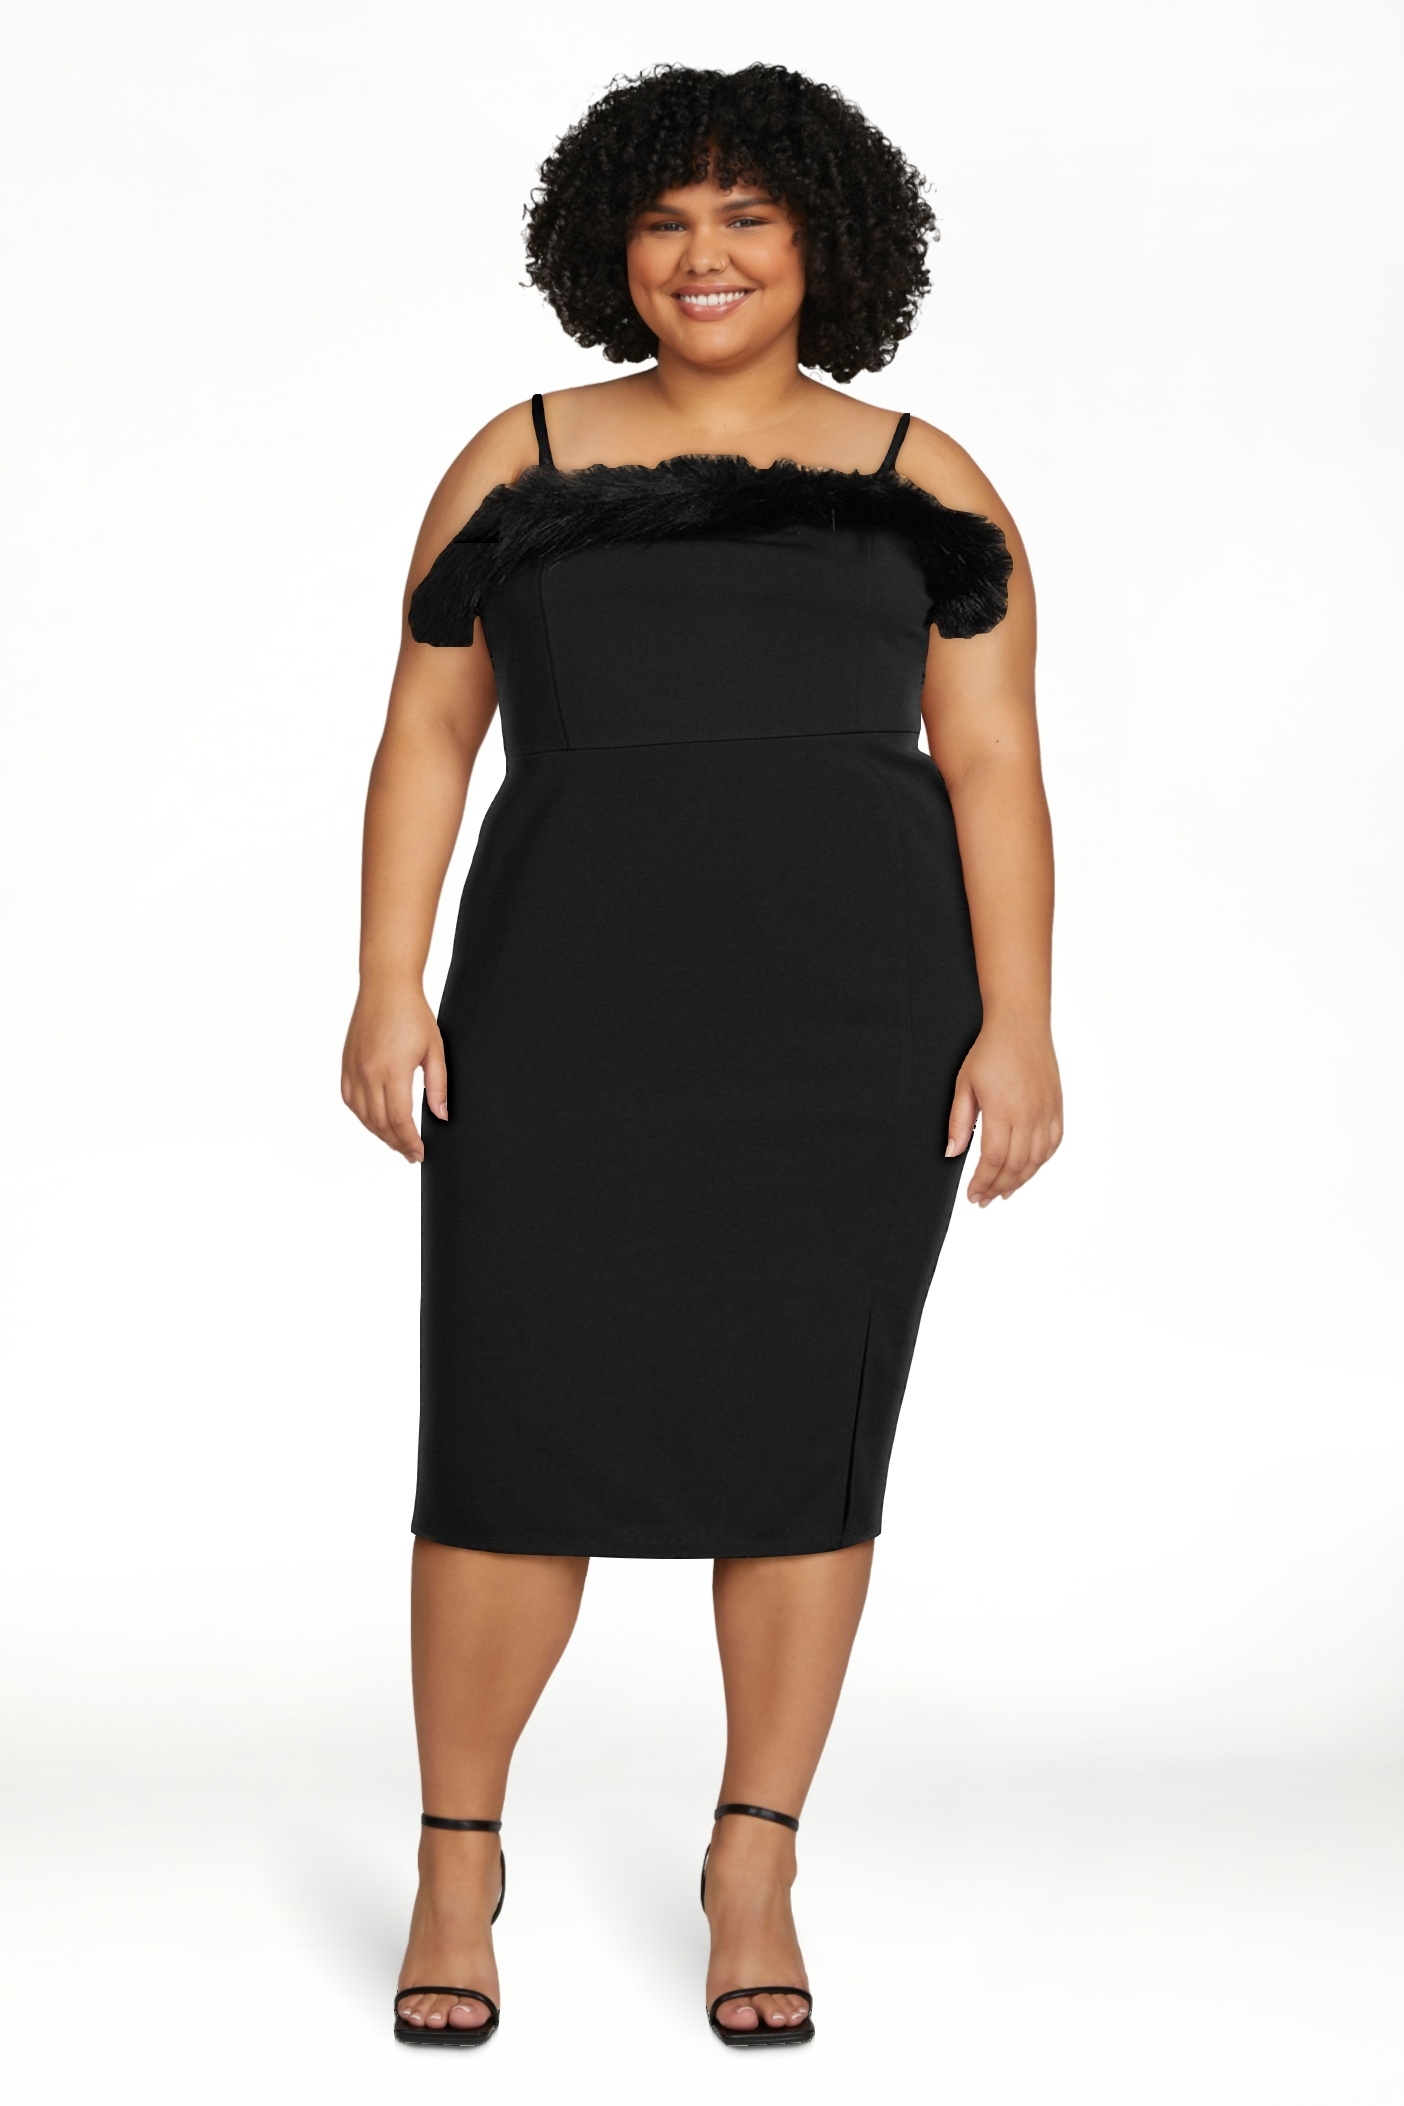 Model in a black midi dress with feather detailing on the neckline, smiling. Suitable for cocktail attire shopping